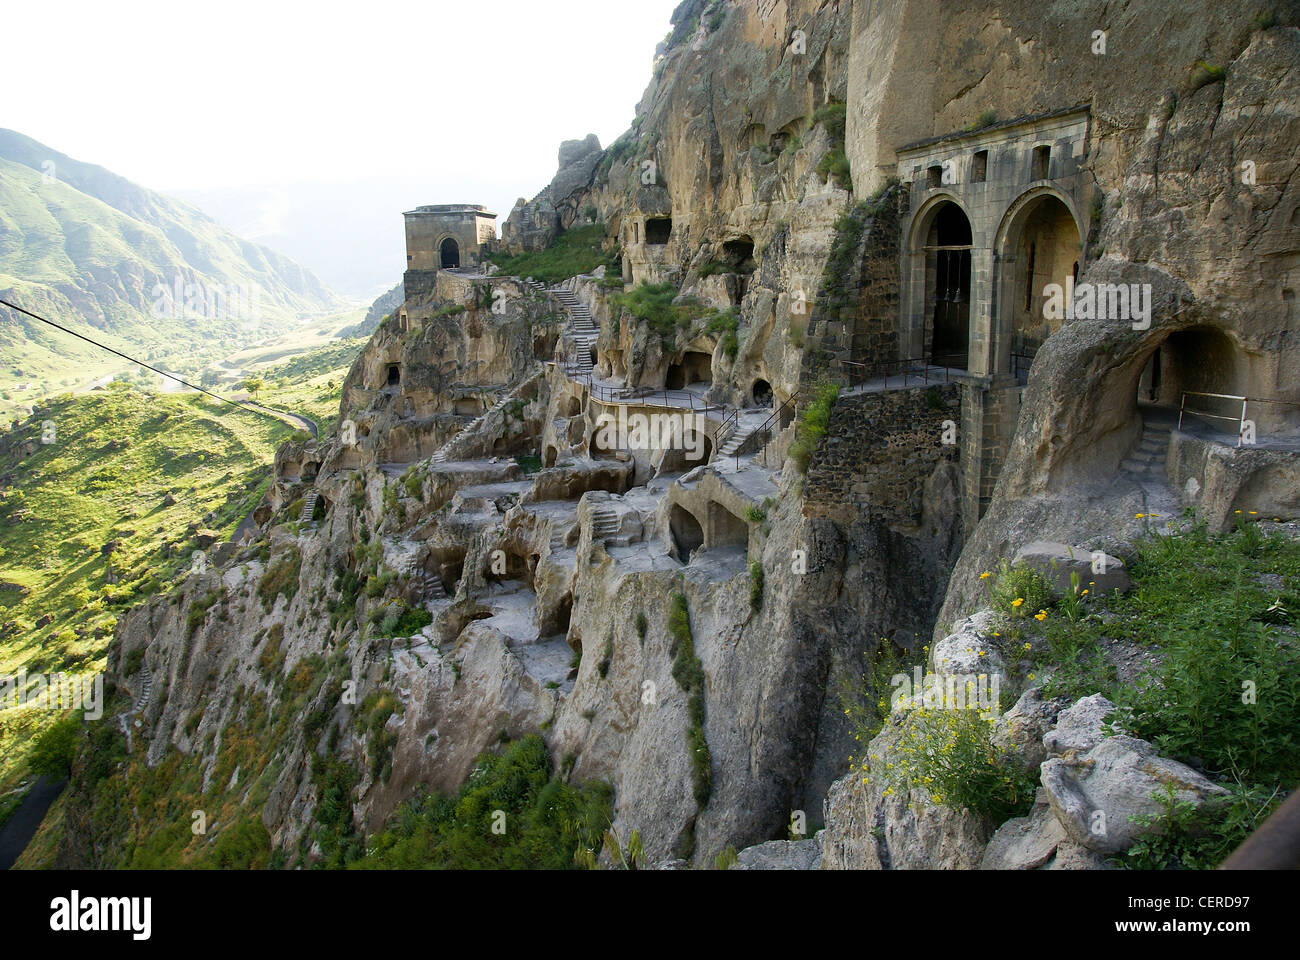 Georgia, The cave city of Vardzia a cave city and monastery dug into the side of the Erusheli mountain in southern Georgia Stock Photo